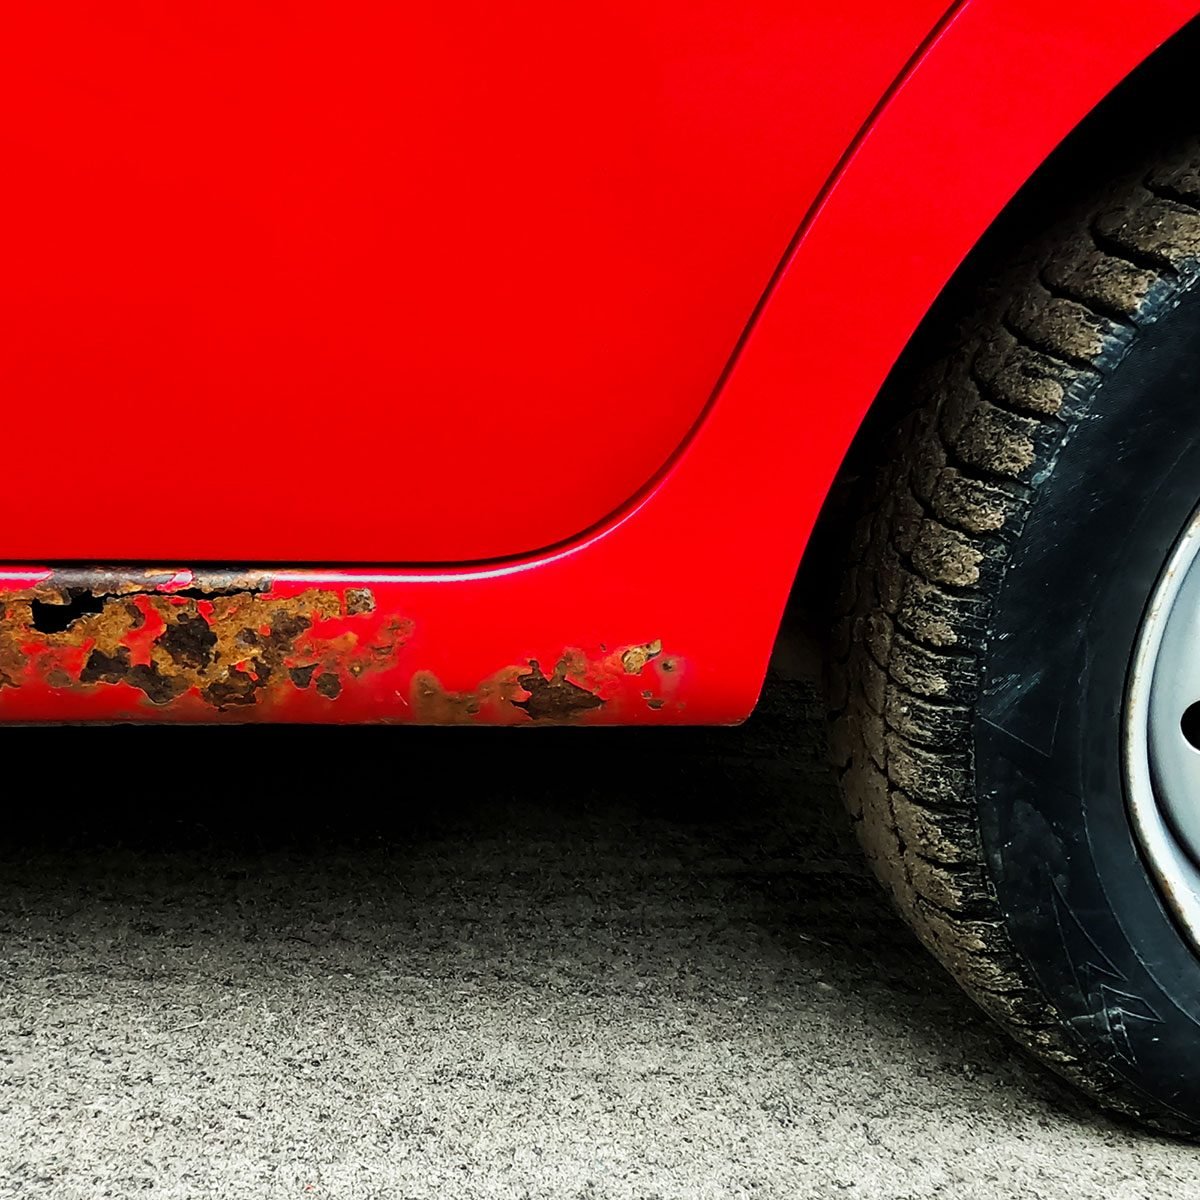 What Causes Rust?